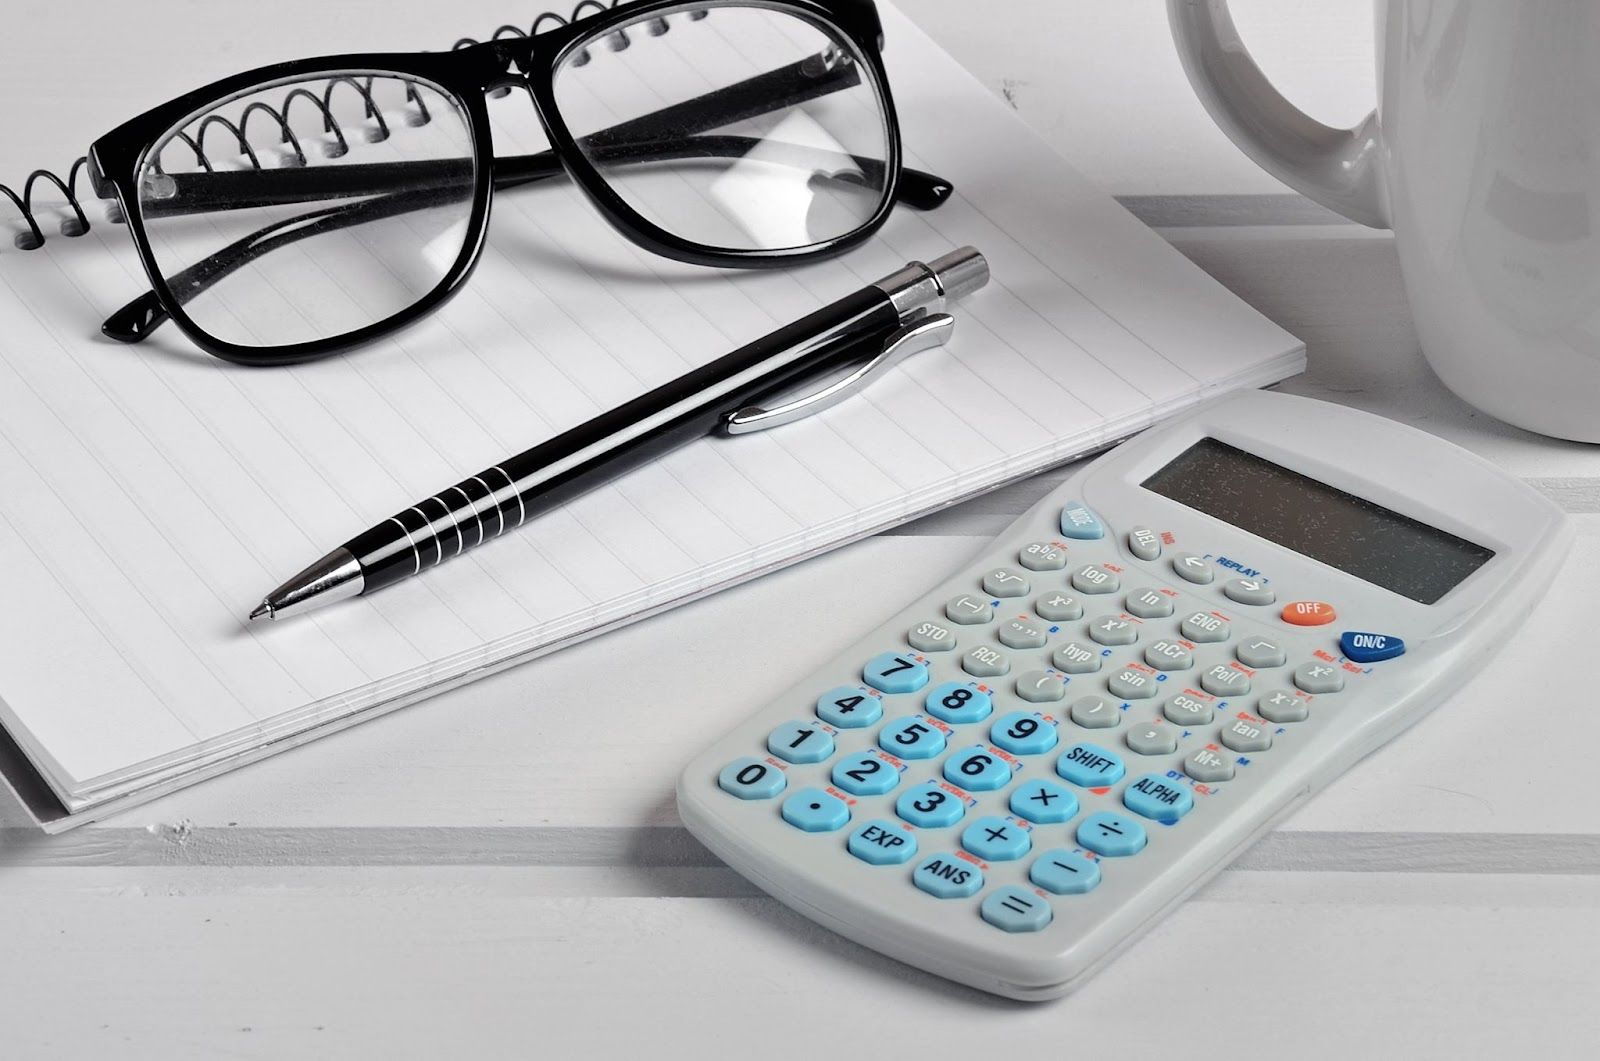 Glasses, pen, spiral notebook, calculator, and coffee mug rest atop a white surface